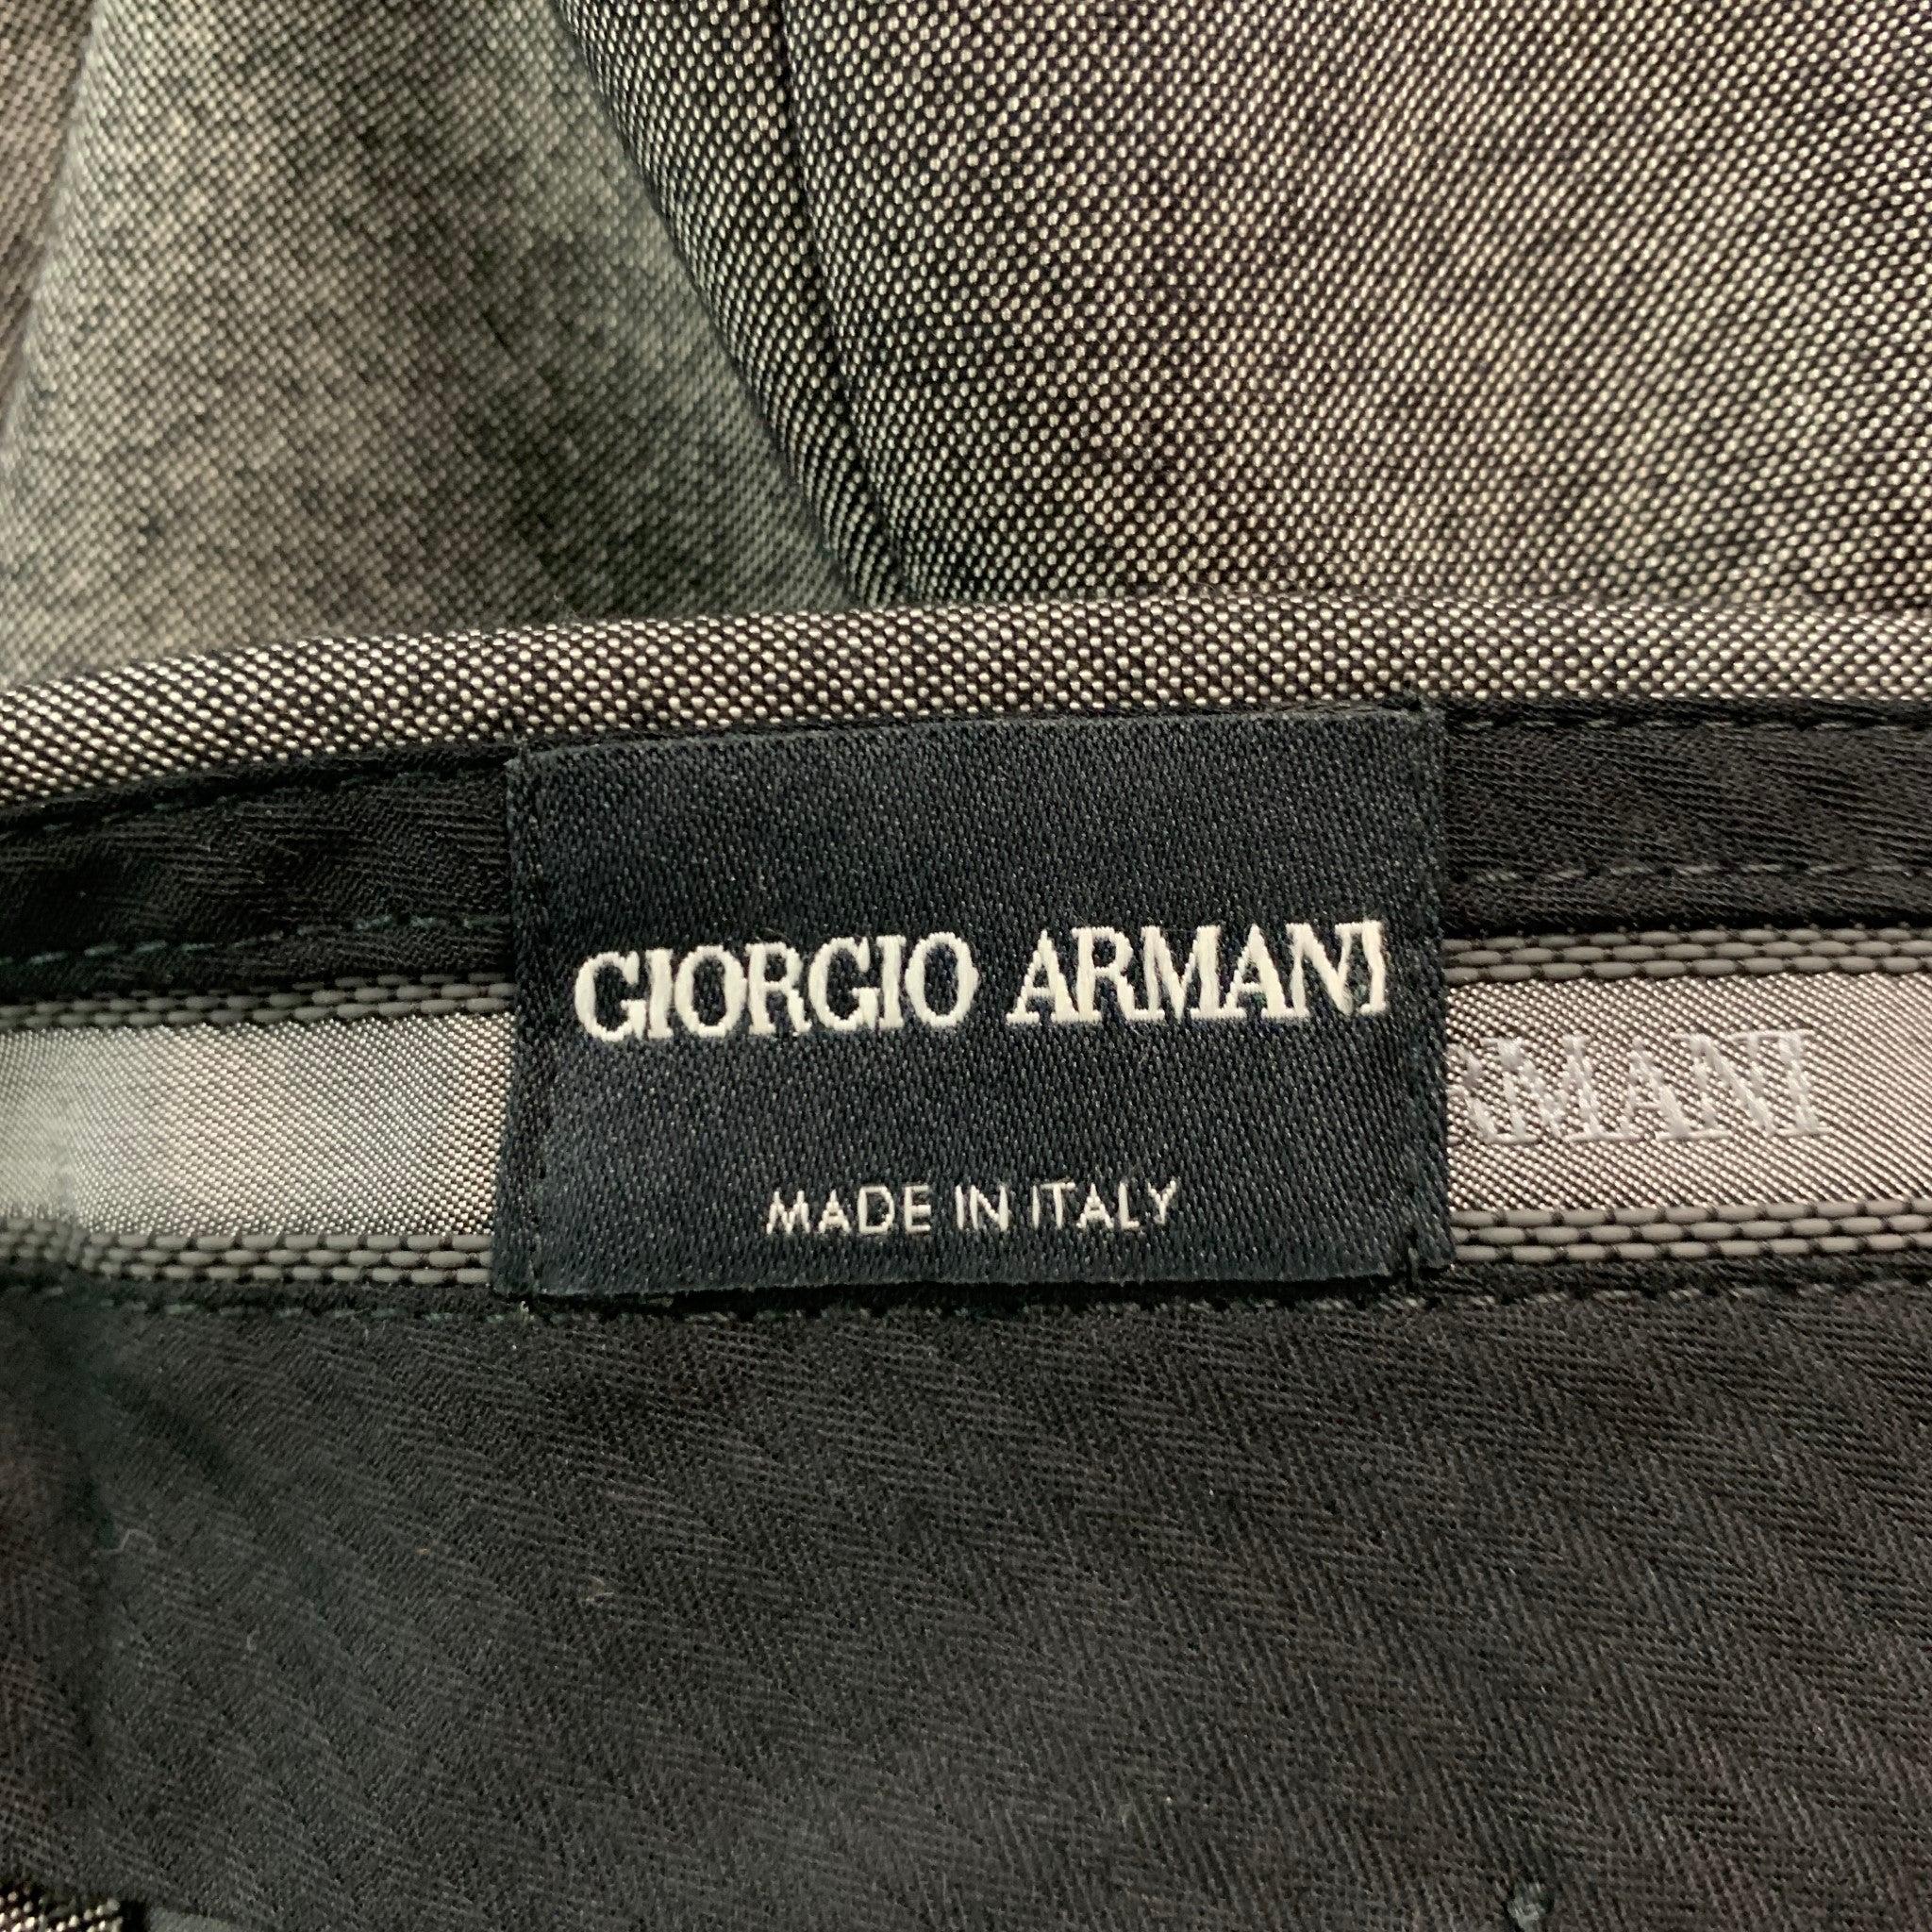 GIORGIO ARMANI Size 34 Grey Heather Wool Blend Zip Fly Dress Pants In Excellent Condition For Sale In San Francisco, CA